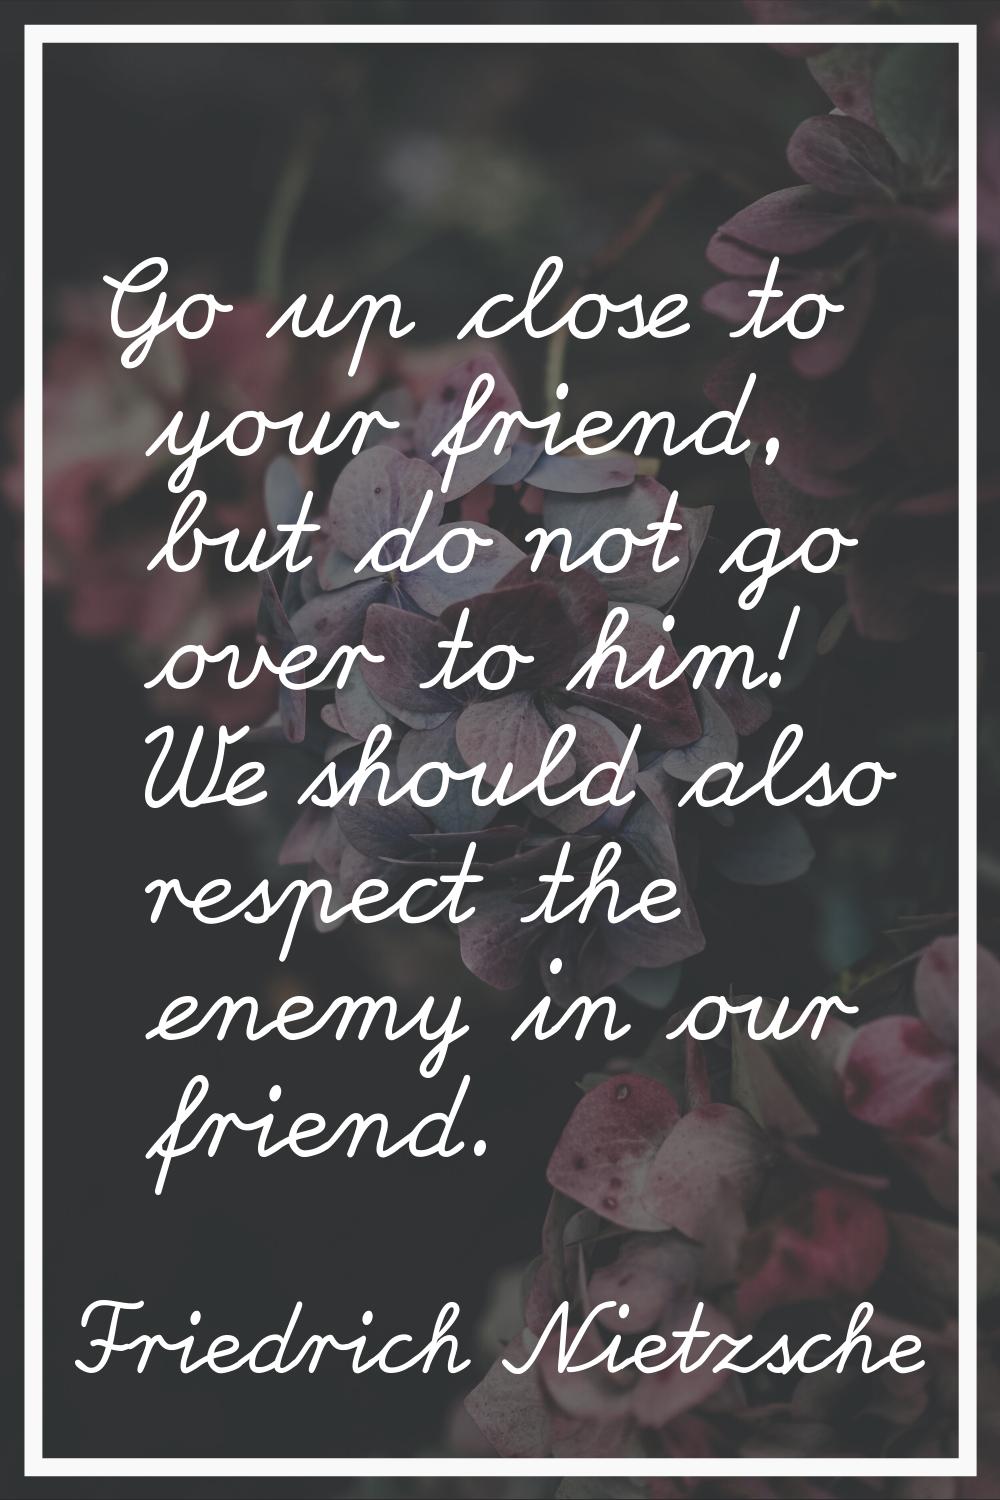 Go up close to your friend, but do not go over to him! We should also respect the enemy in our frie